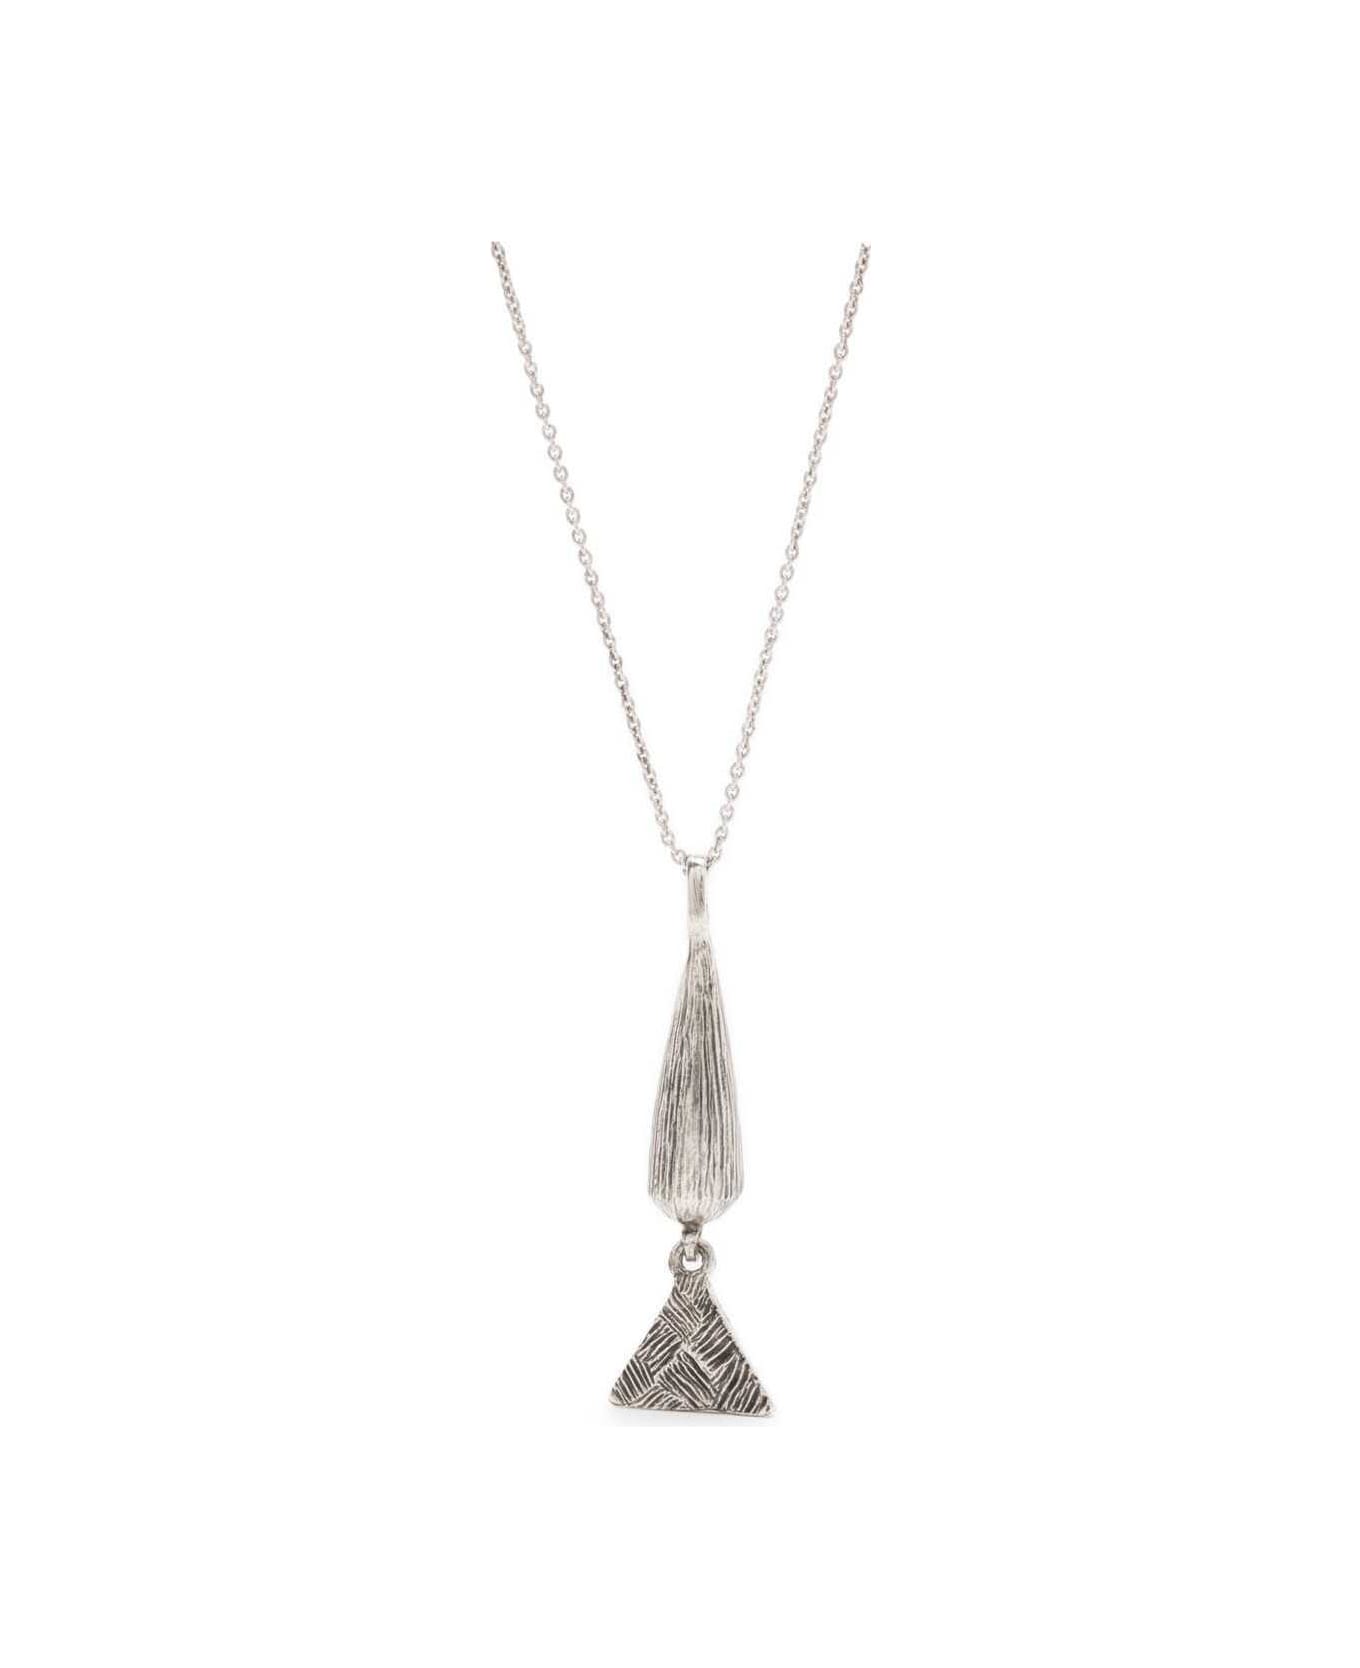 Saint Laurent Long Silver-colored Chain Necklace With Conical And Triangular Charm In Brass Man - Metallic